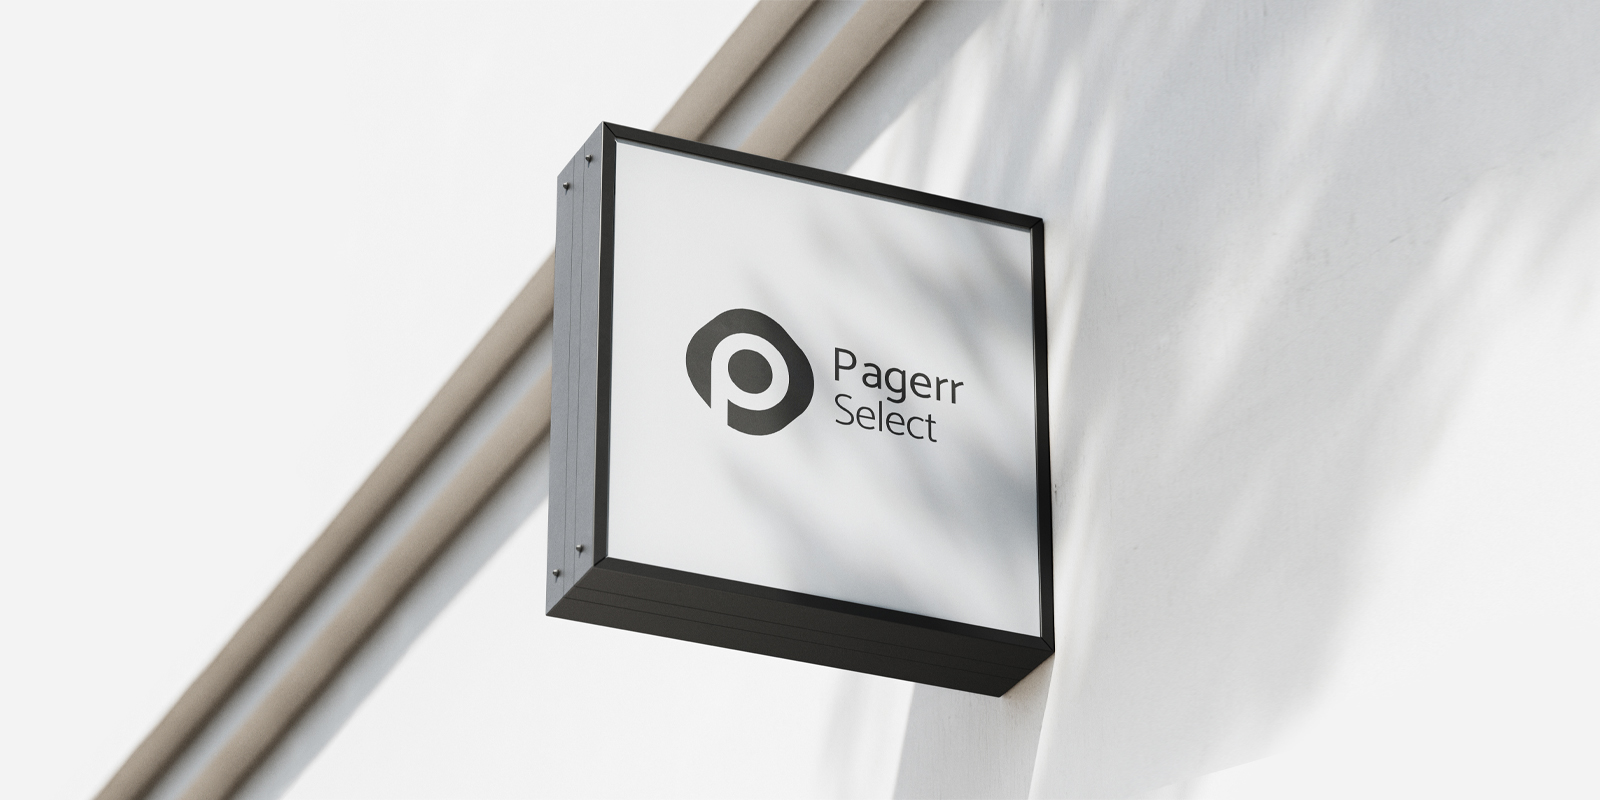 Essential signs in Hamburg - Print with Pagerr